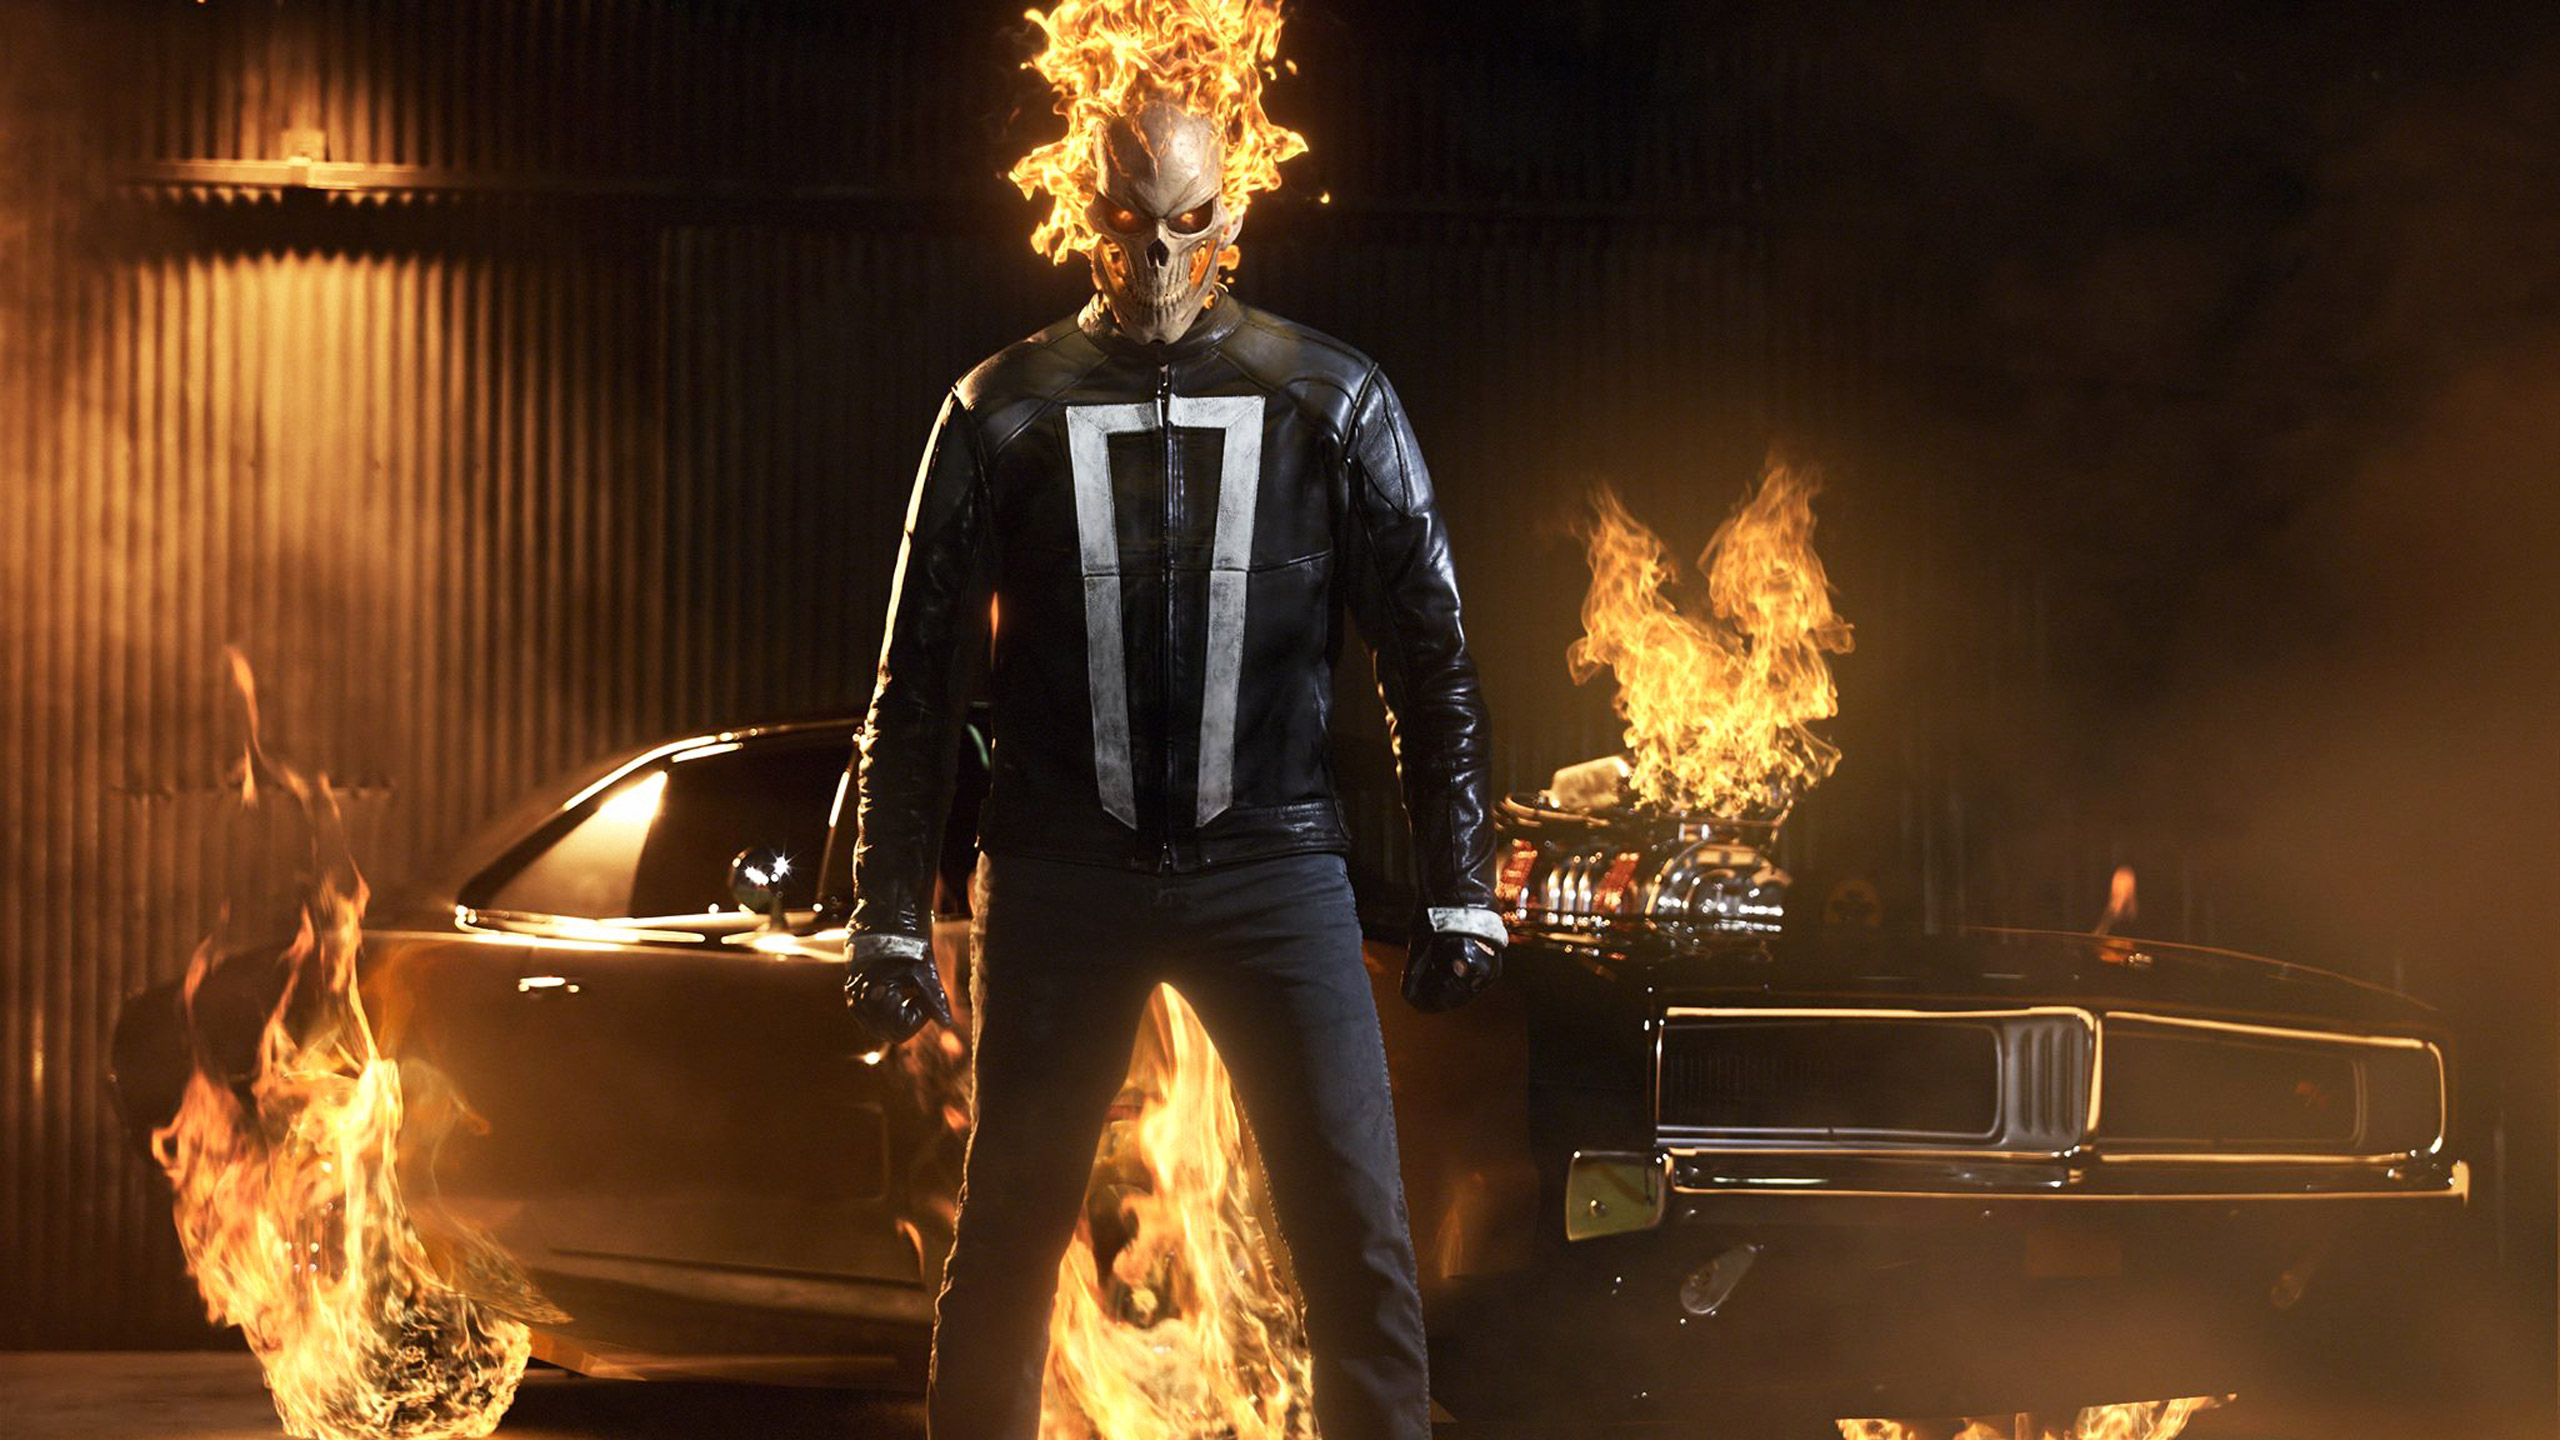 Wallpapers ghost rider TV show movies on the desktop